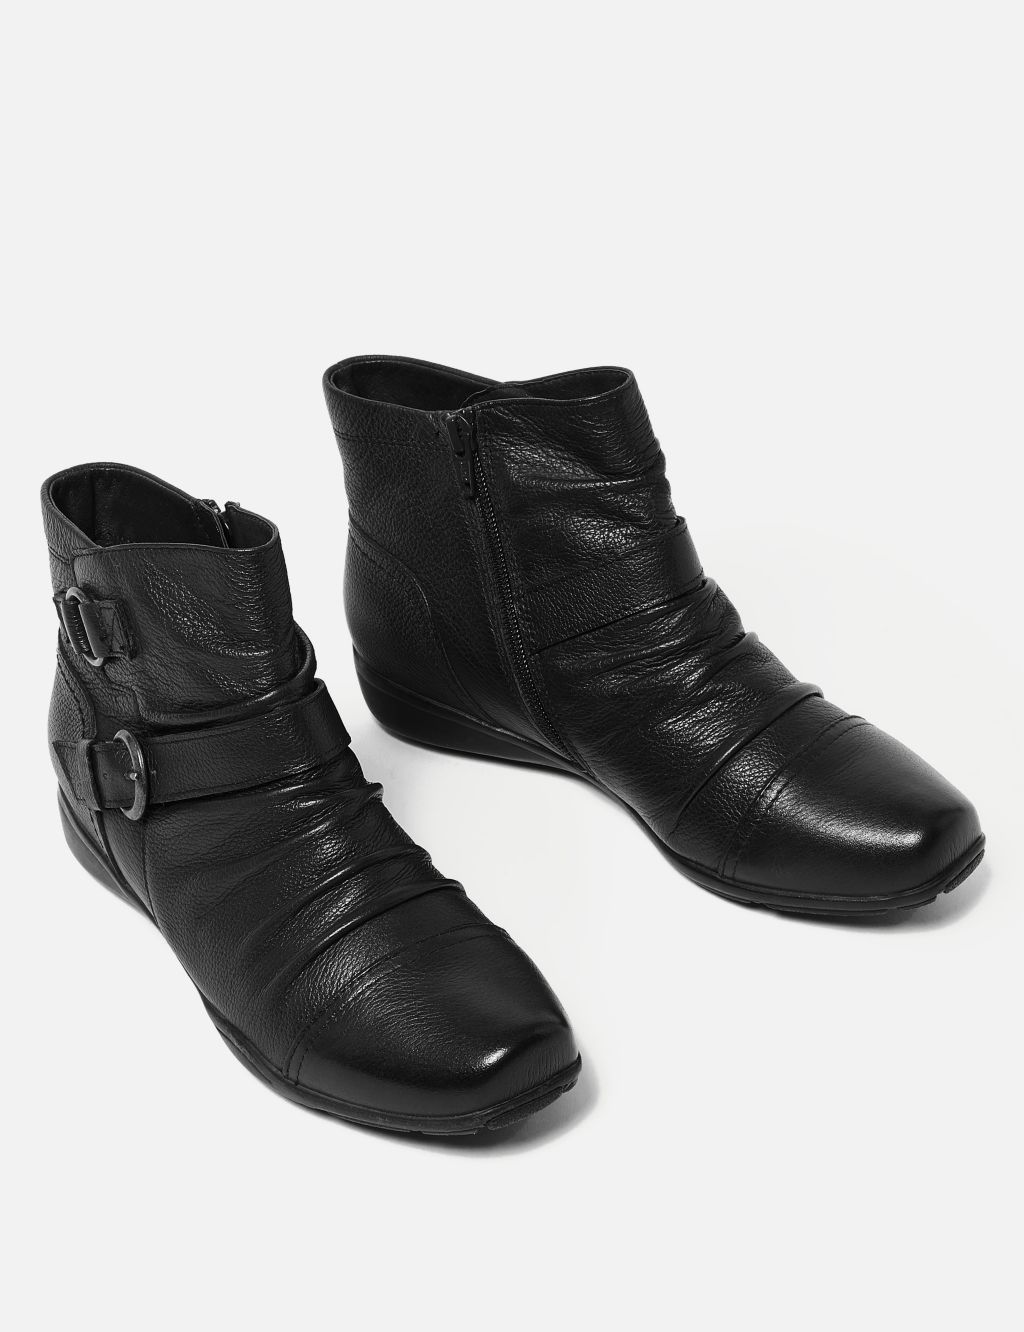 Wide Fit Leather Buckle Ruched Ankle Boots image 2